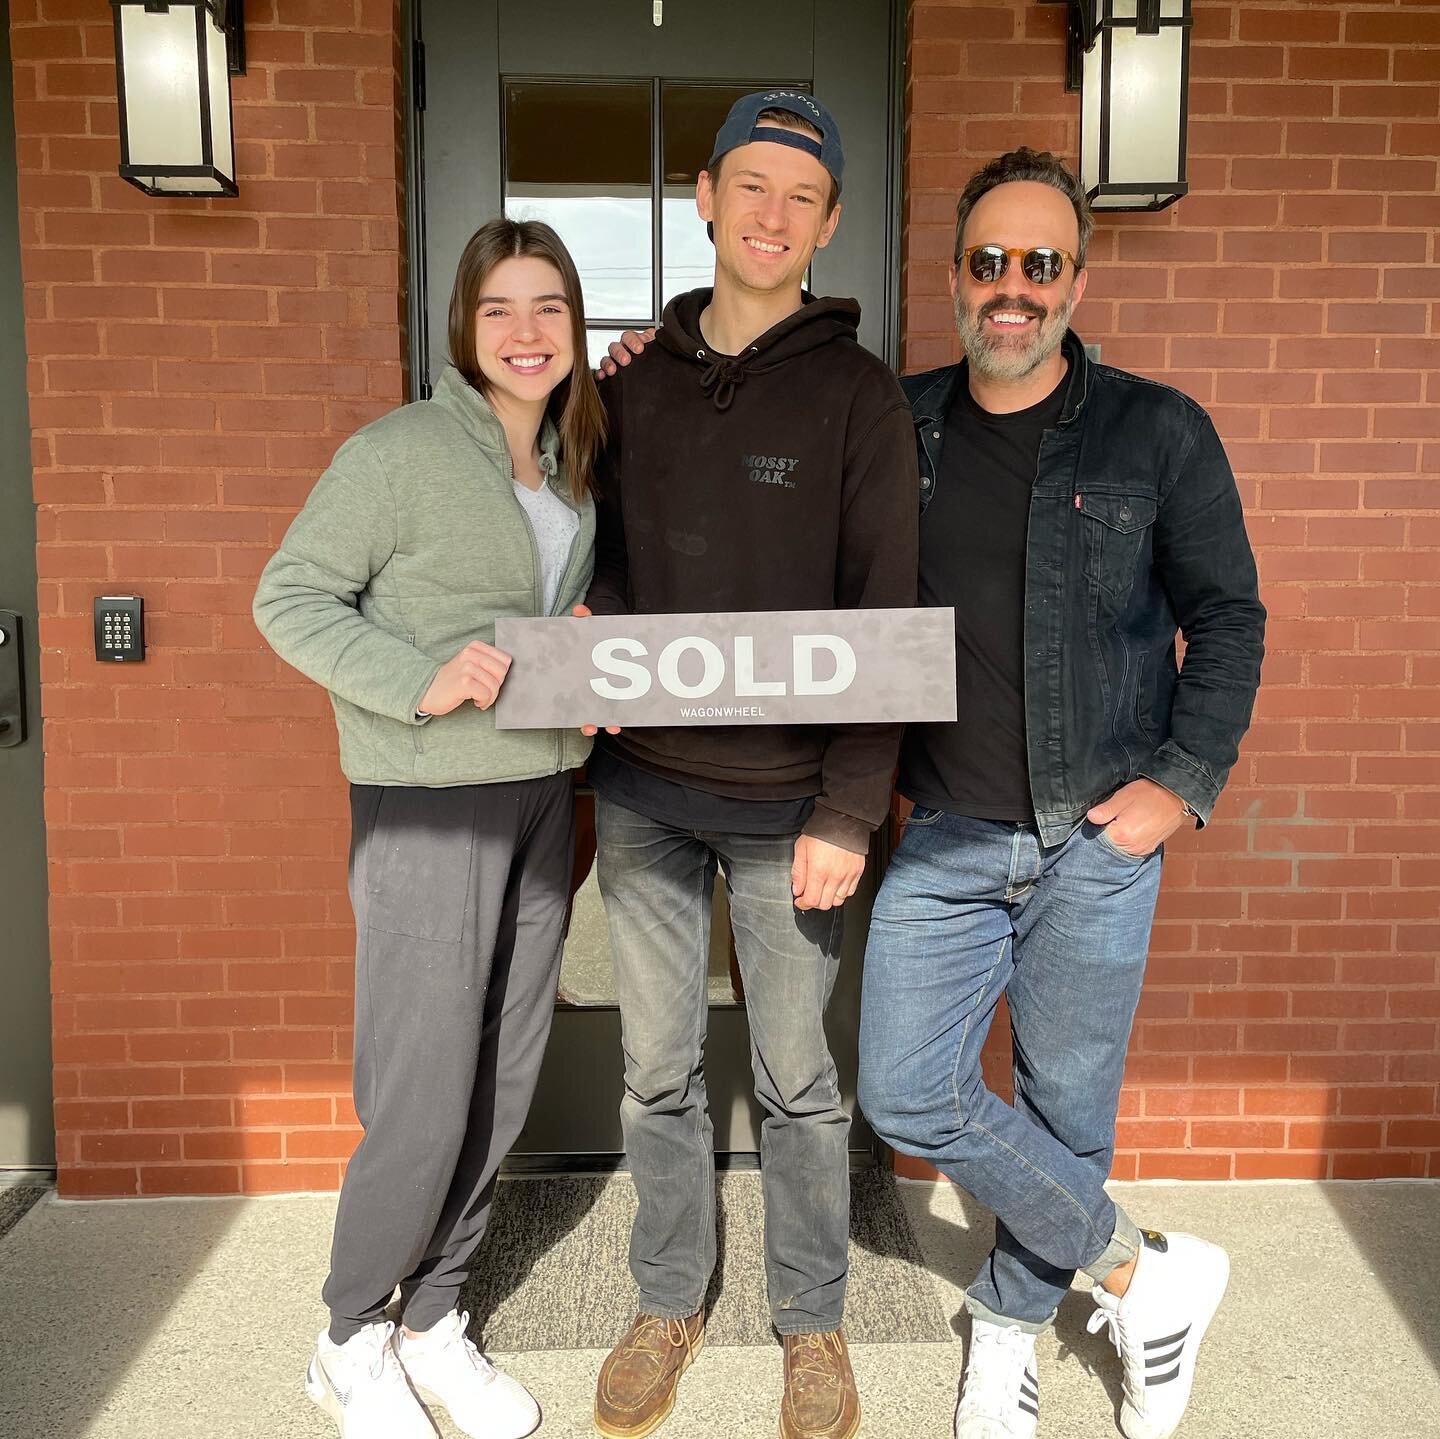 SOLD! It truly was an honor to help my friends Audrey + Joel sell their first home. We found it together and we worked as a team to sell it together. Tennessee takes a loss as these two head back west, but I am grateful to have played a part. Safe tr